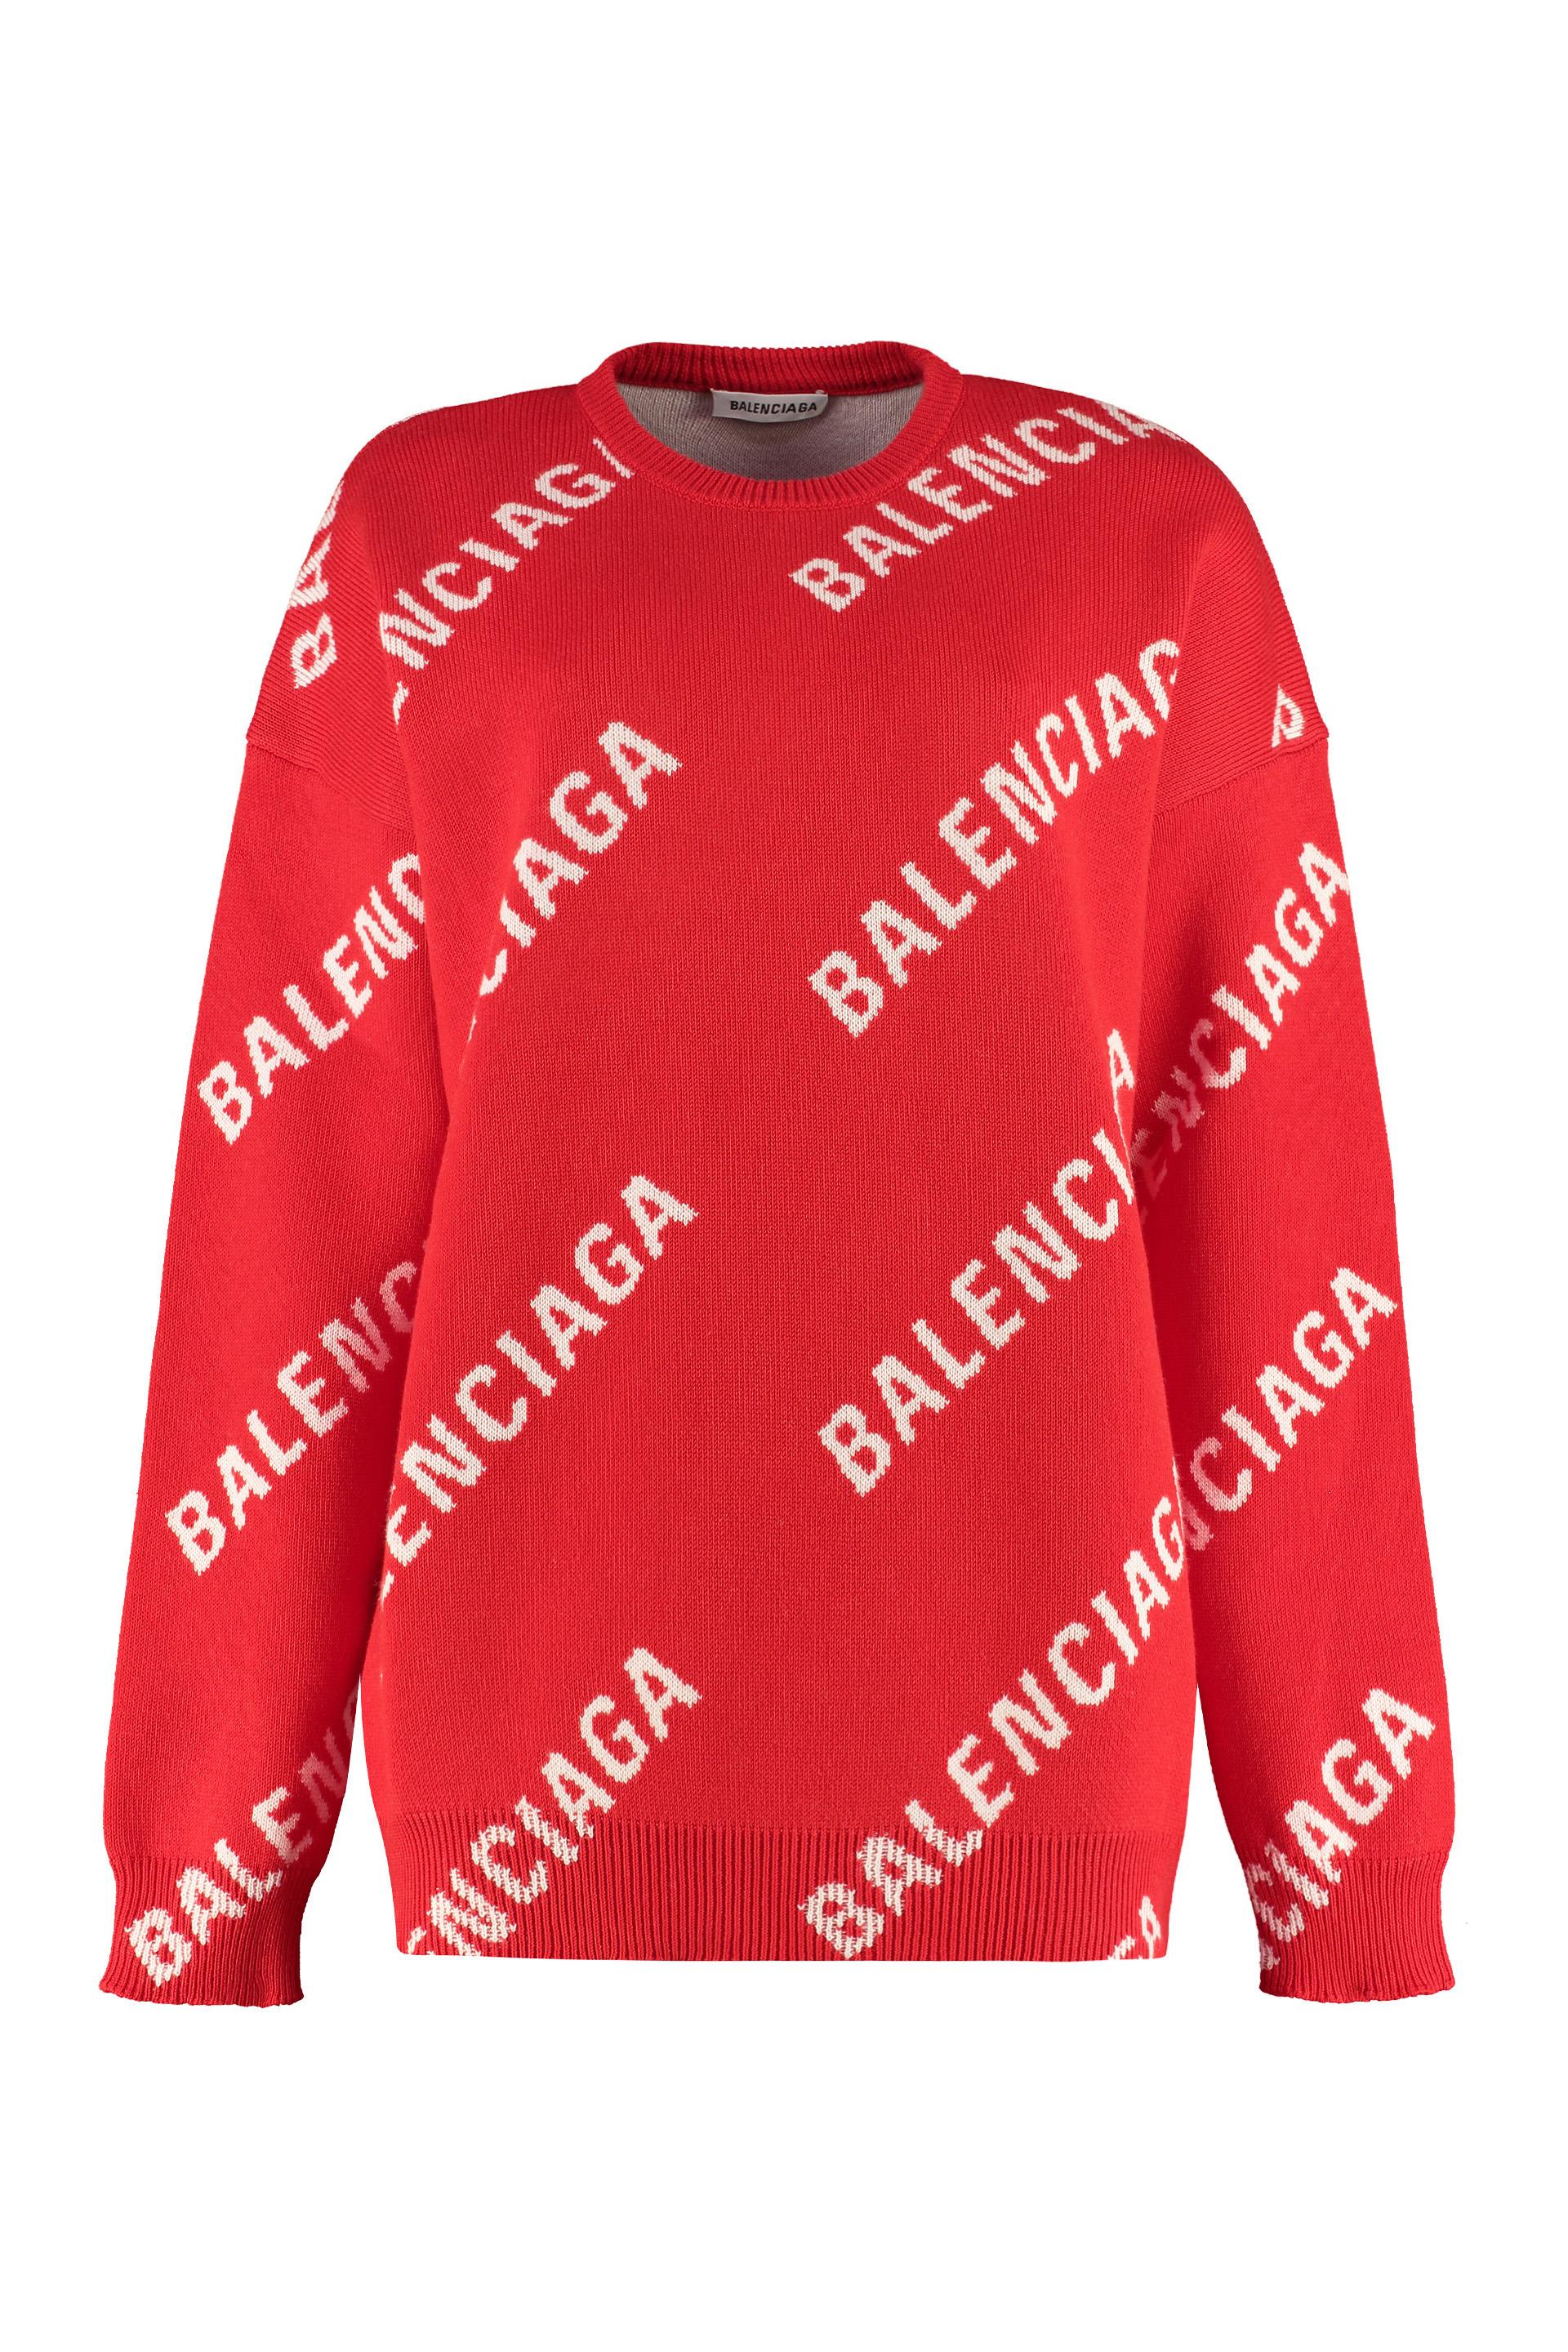 Balenciaga Cotton Oversized Logo Wool-blend Knit Sweater in Red 